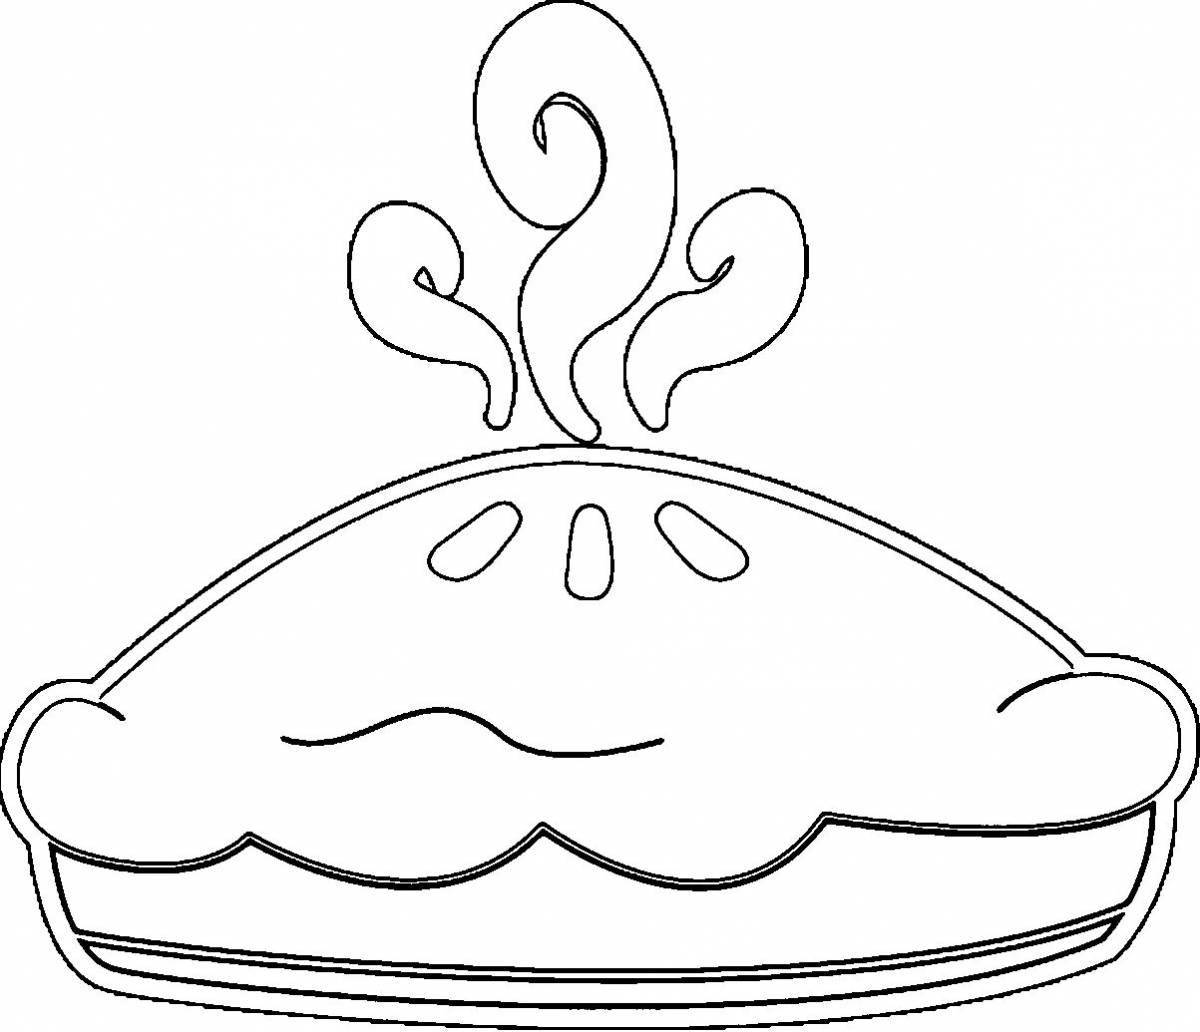 Sweet-smelling apple pie coloring page